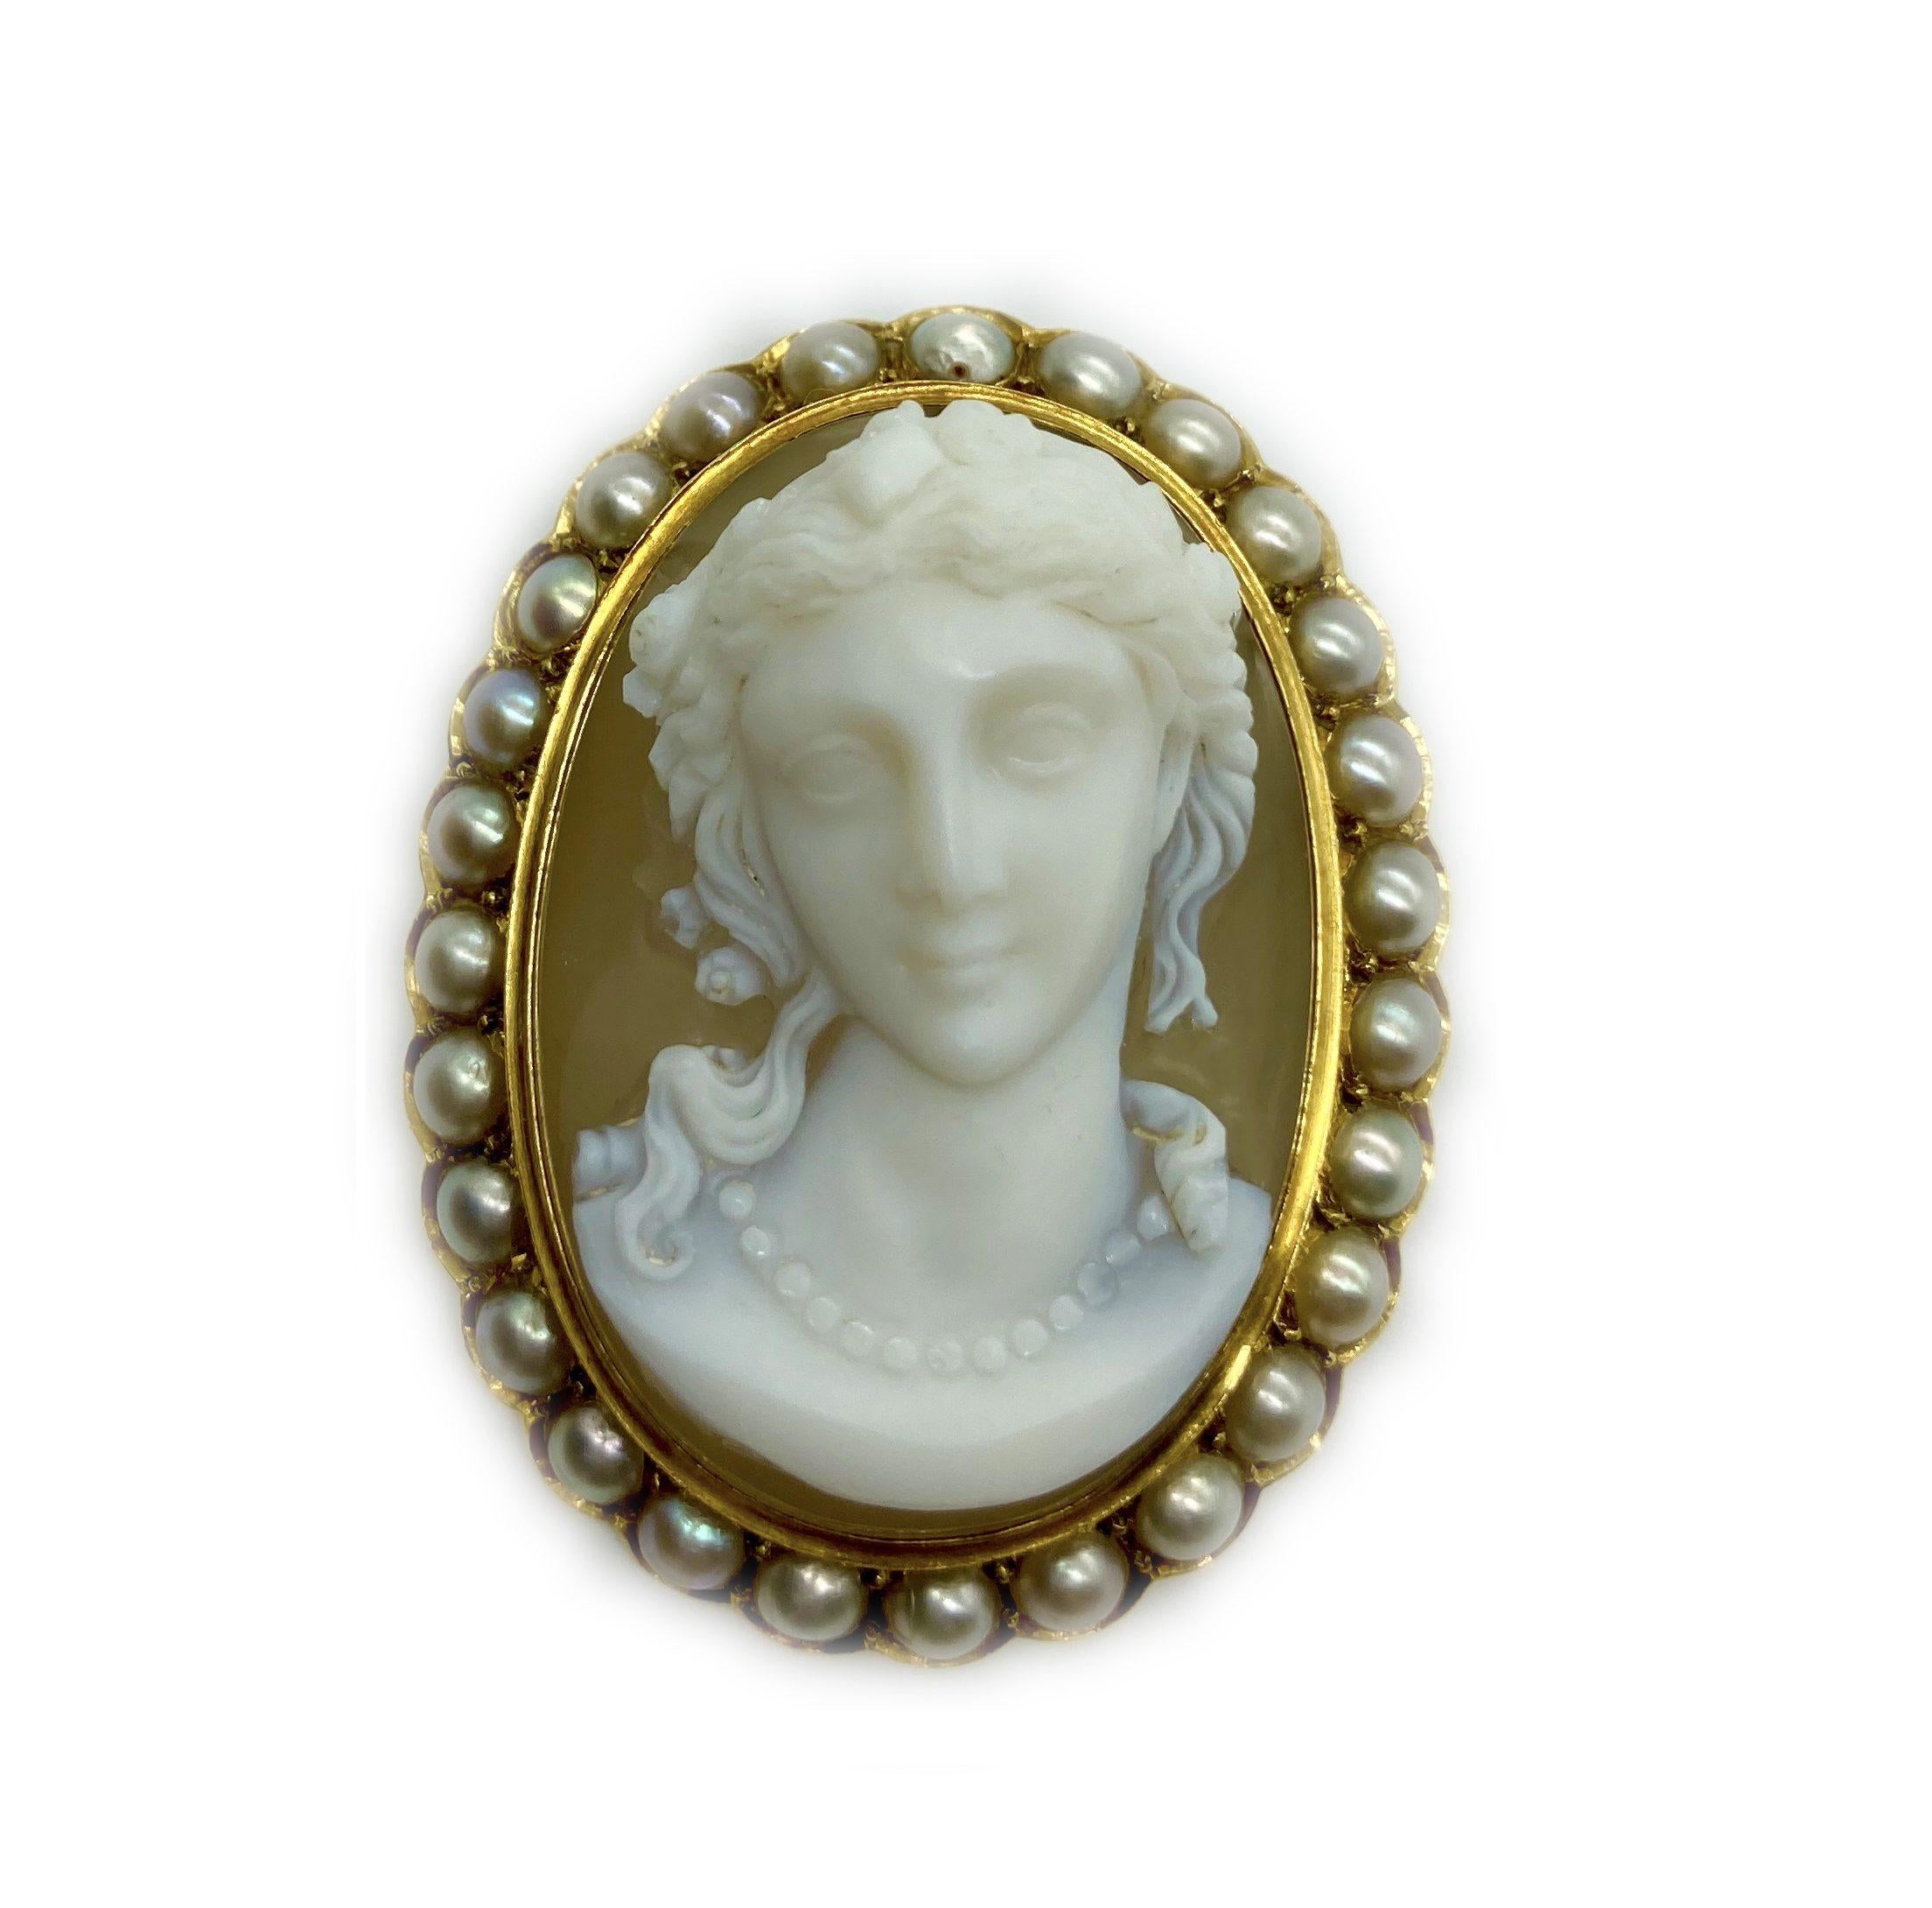 A three-dimensional antique brooch, the female bust extending from an agate center, and bordered with pearls.